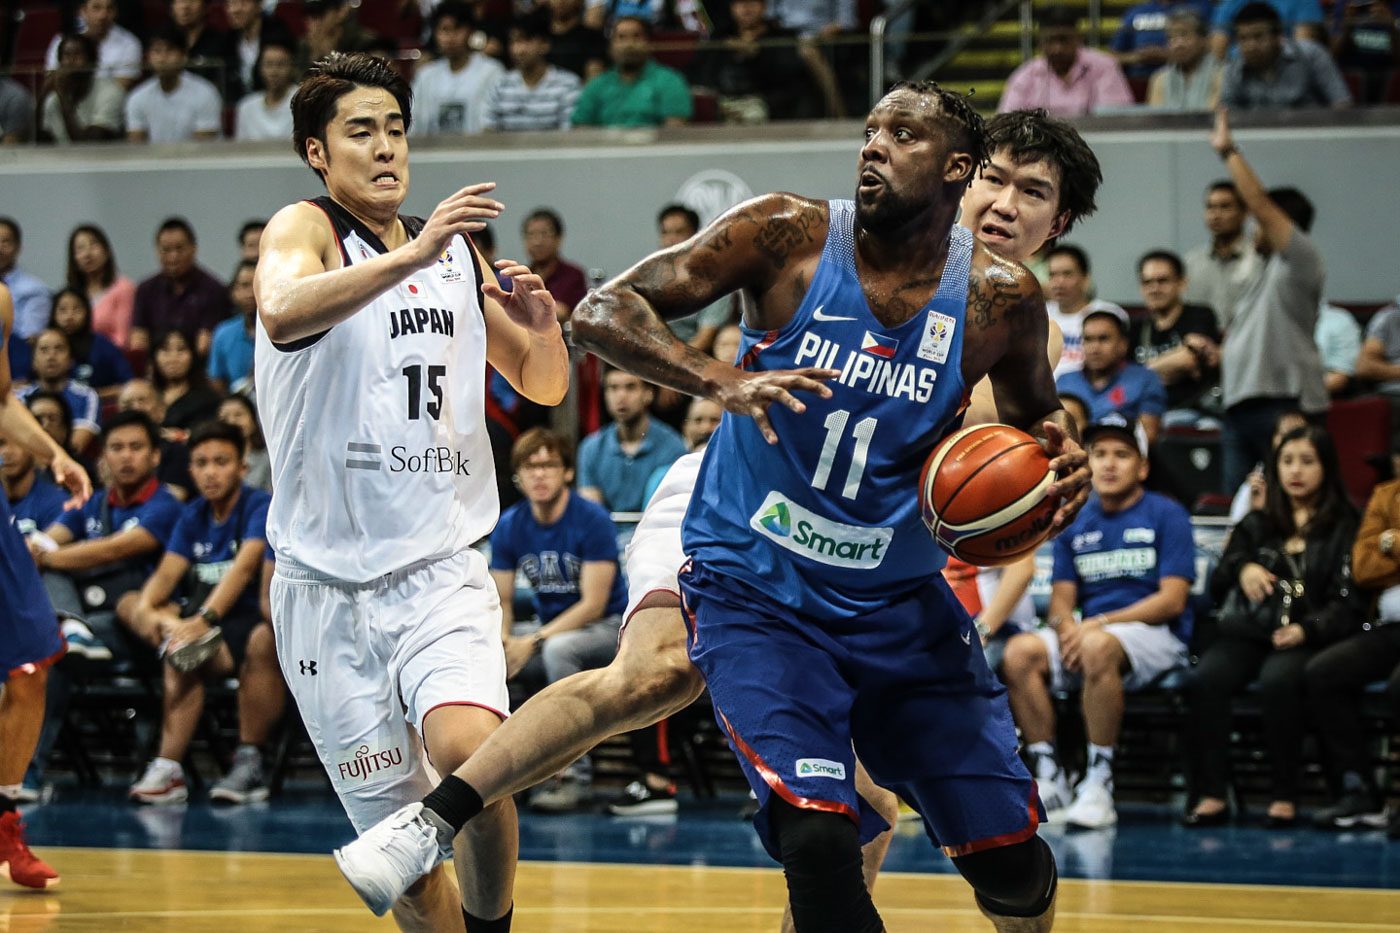 Chot Reyes comes to defense of criticized Andray Blatche